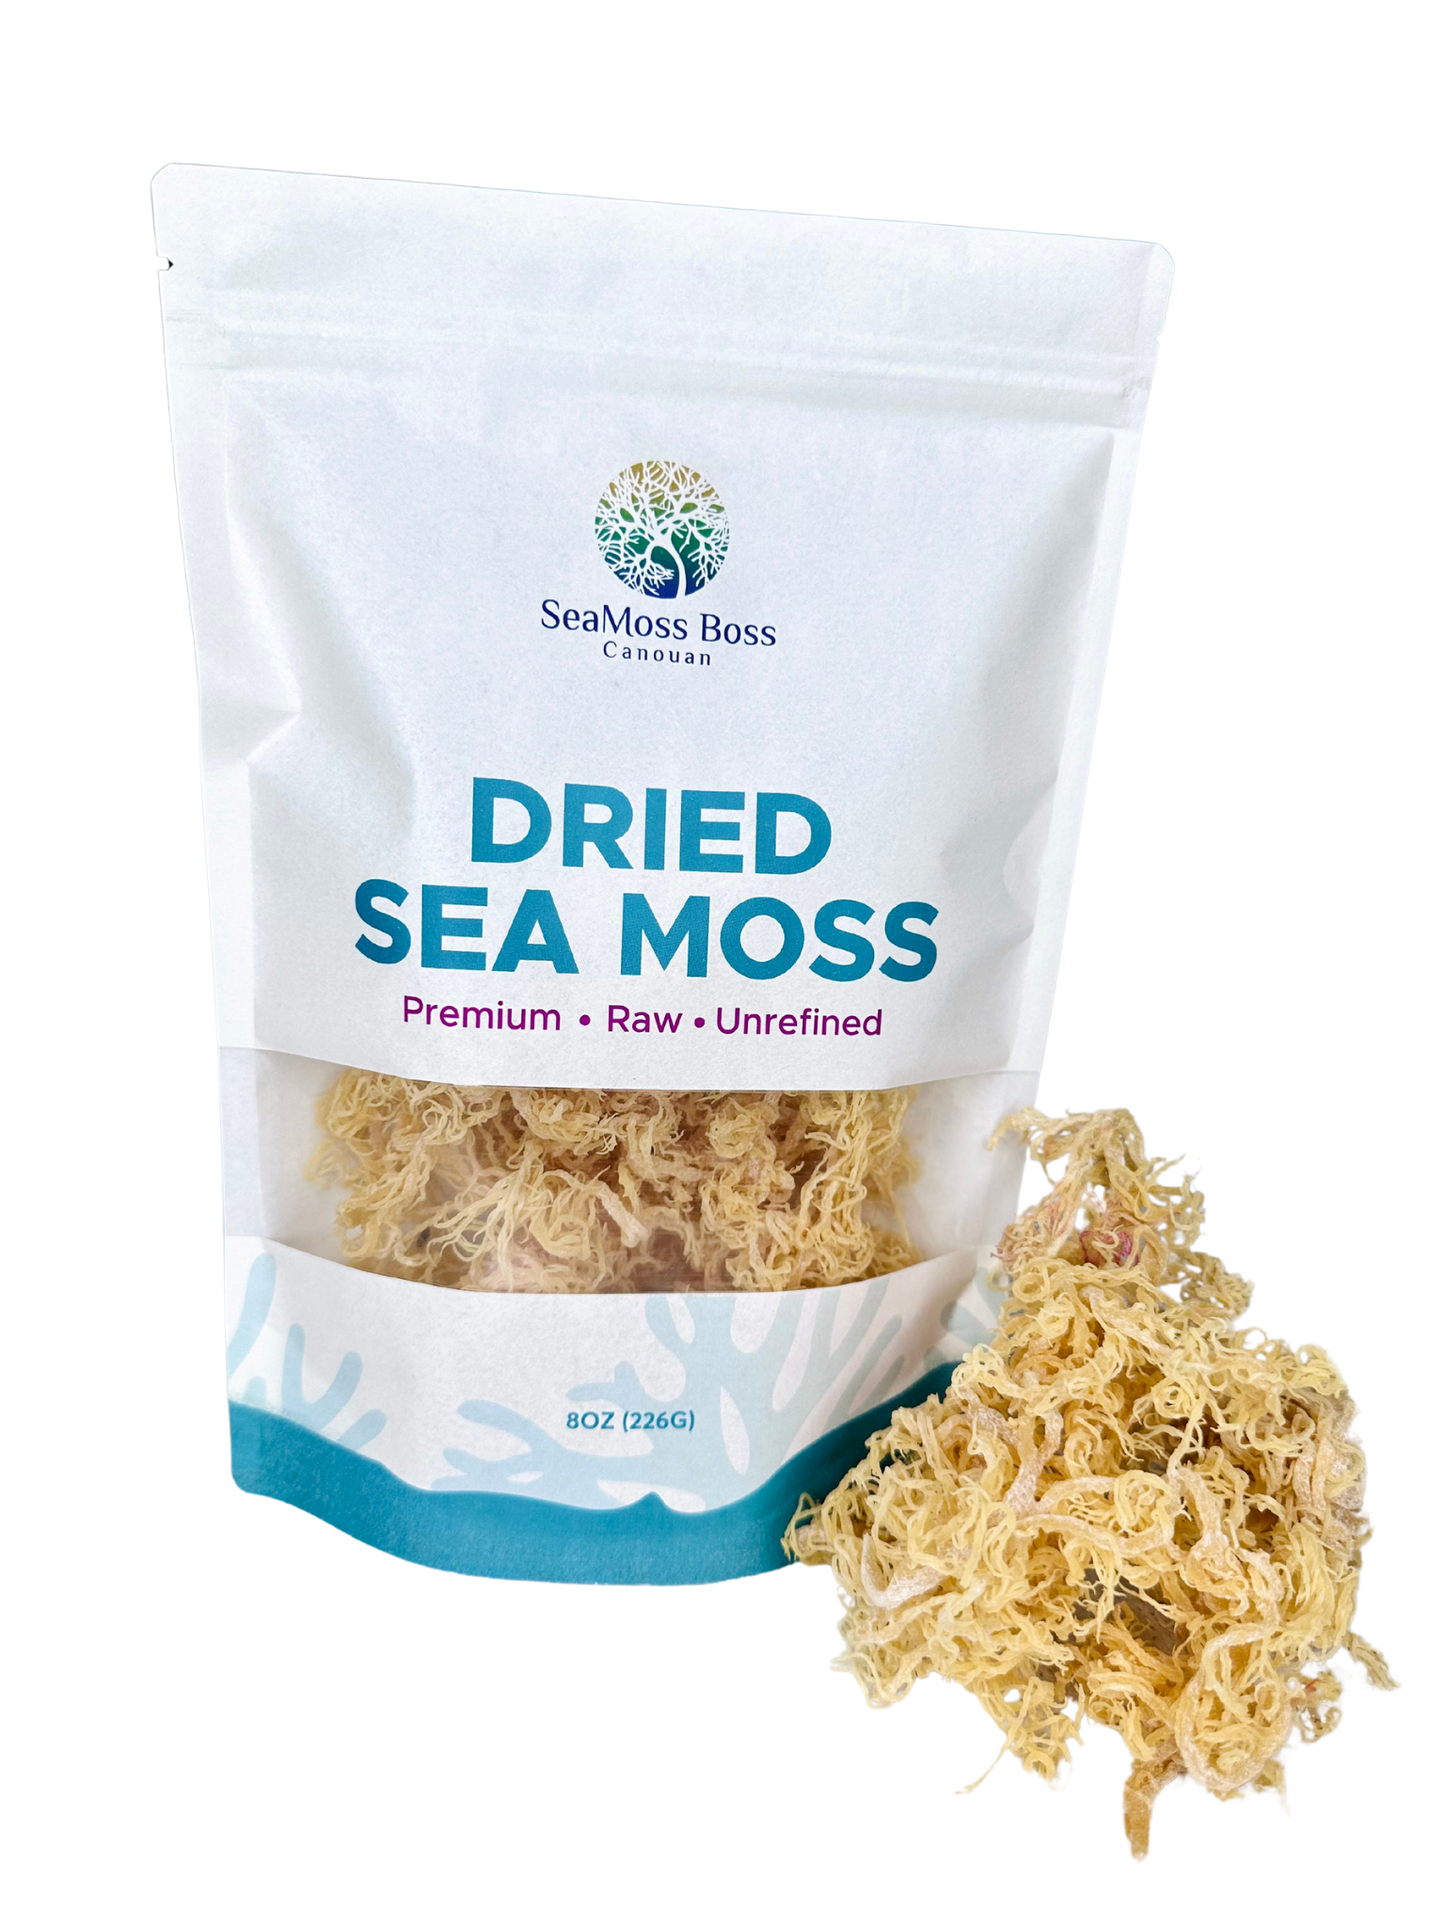 SeaMoss Boss Canouan | Dried Gold sea Moss | Ocean harvested and Sun-Dried in The Remote Grenadine Islands | Easy to use | Makes 60oz sea Moss Gel